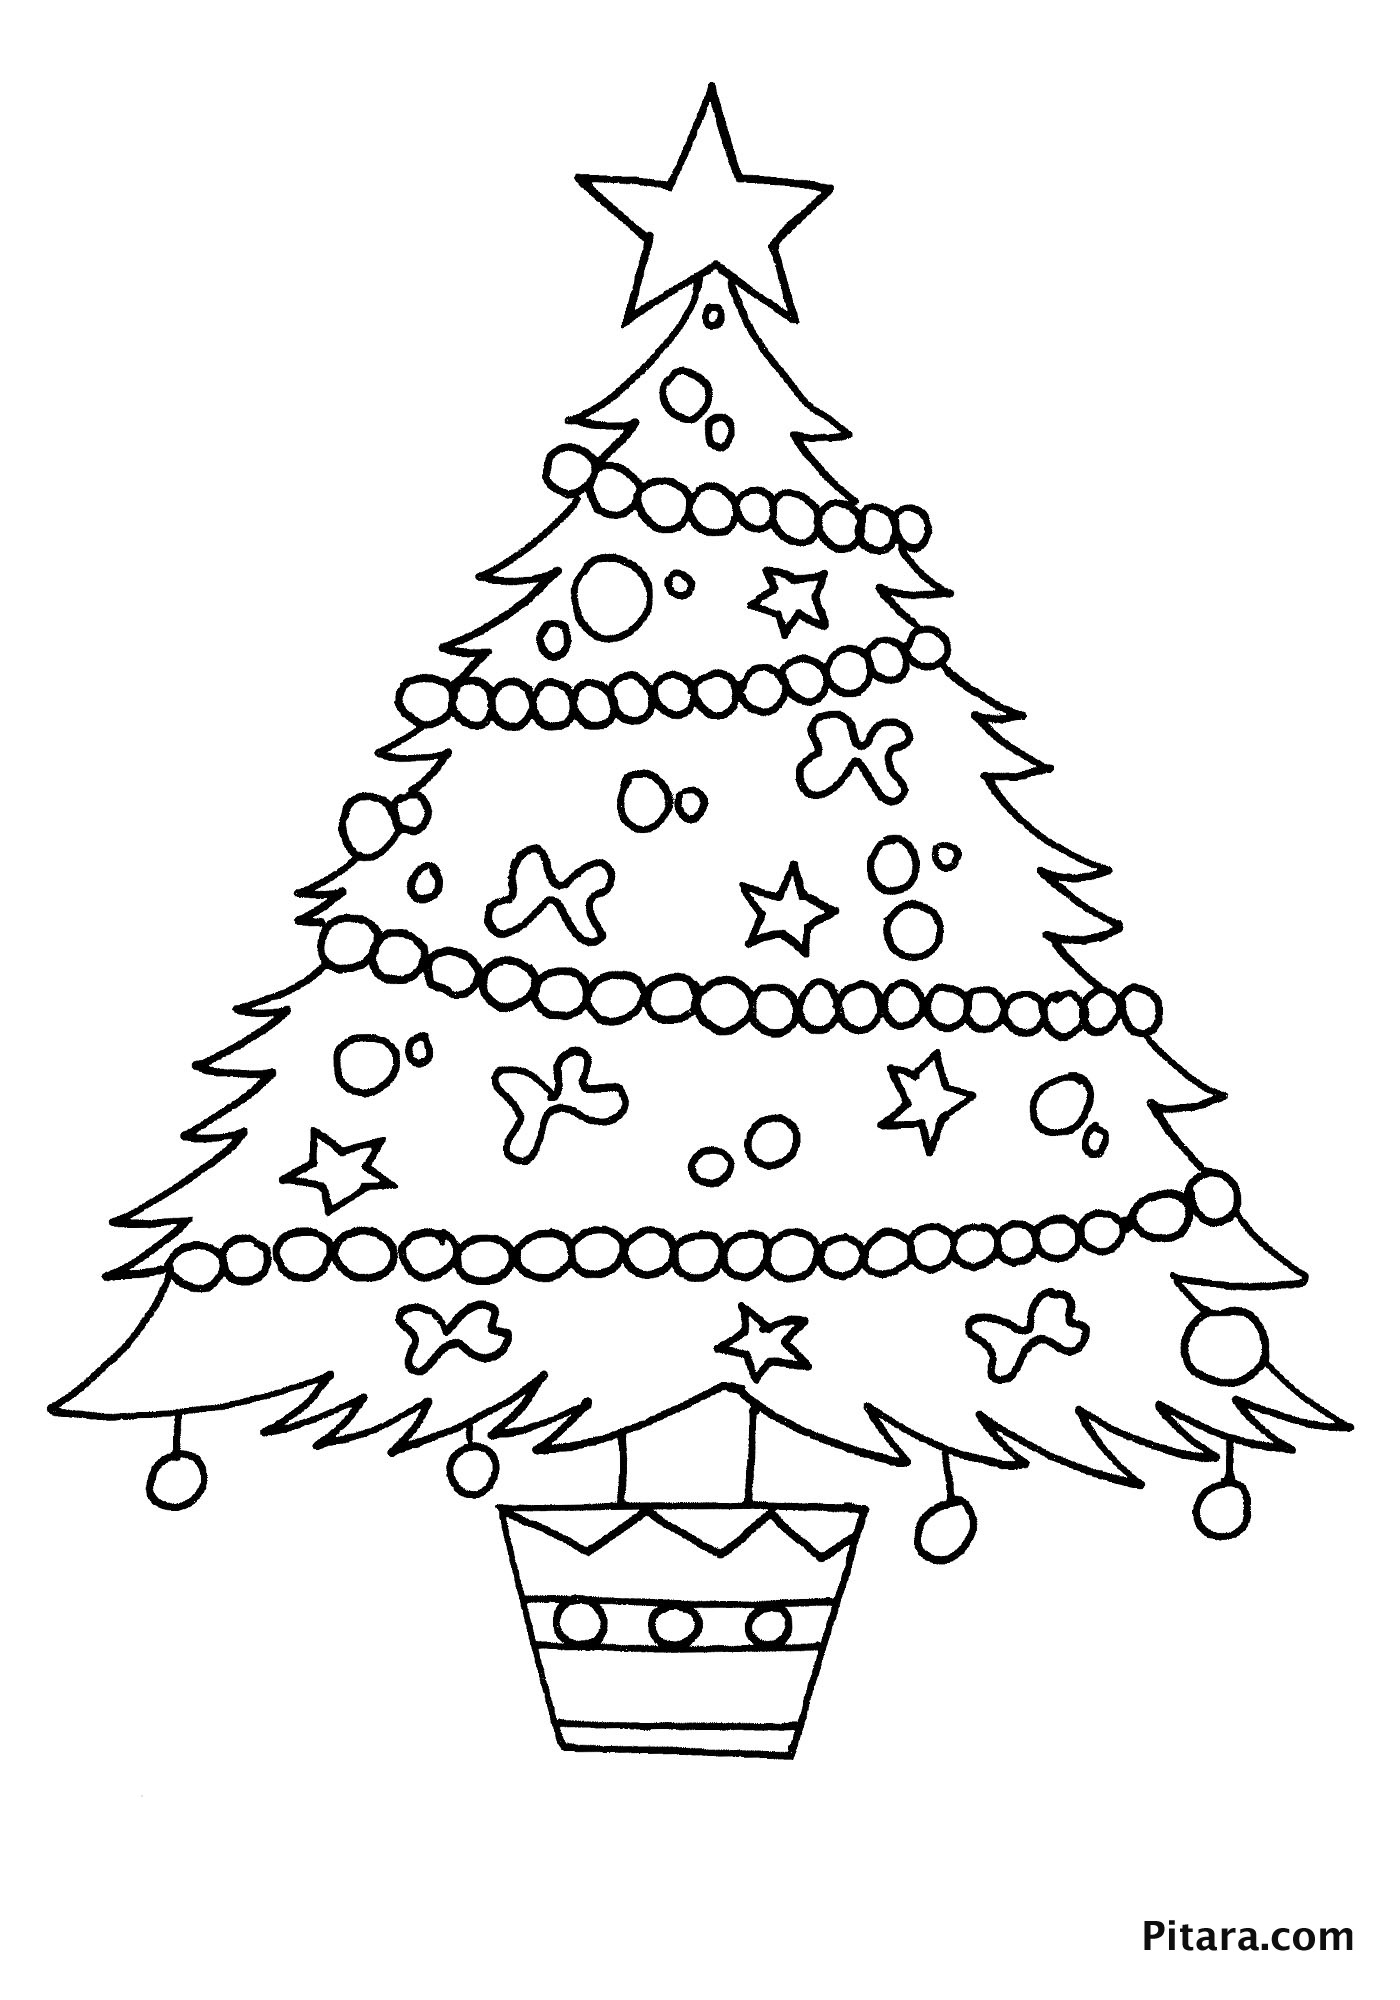 christmas-coloring-pages-for-kids-pitara-kids-network